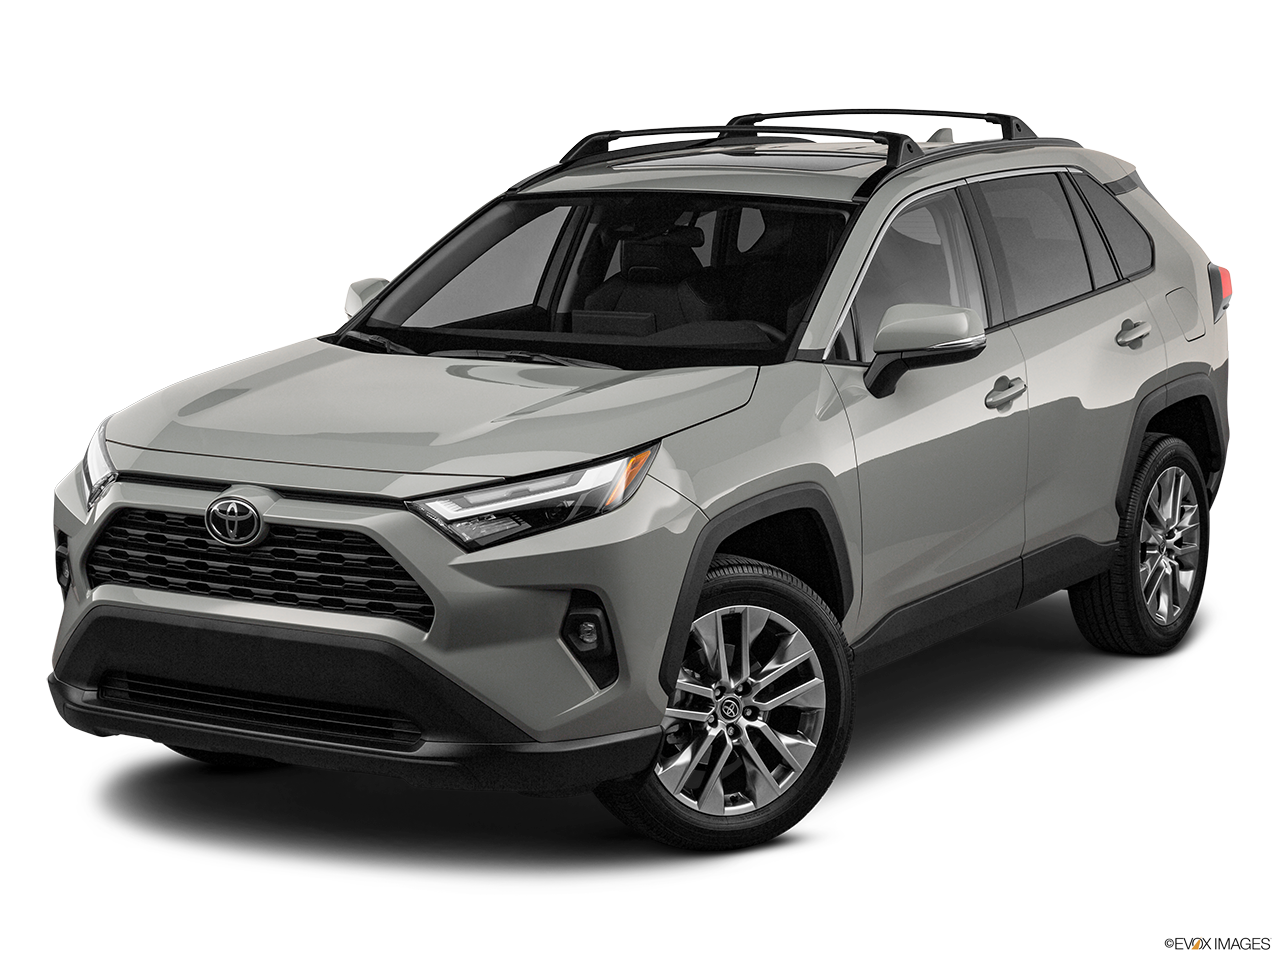 Is the Toyota RAV4 a 5-Seater or 7-Seater?